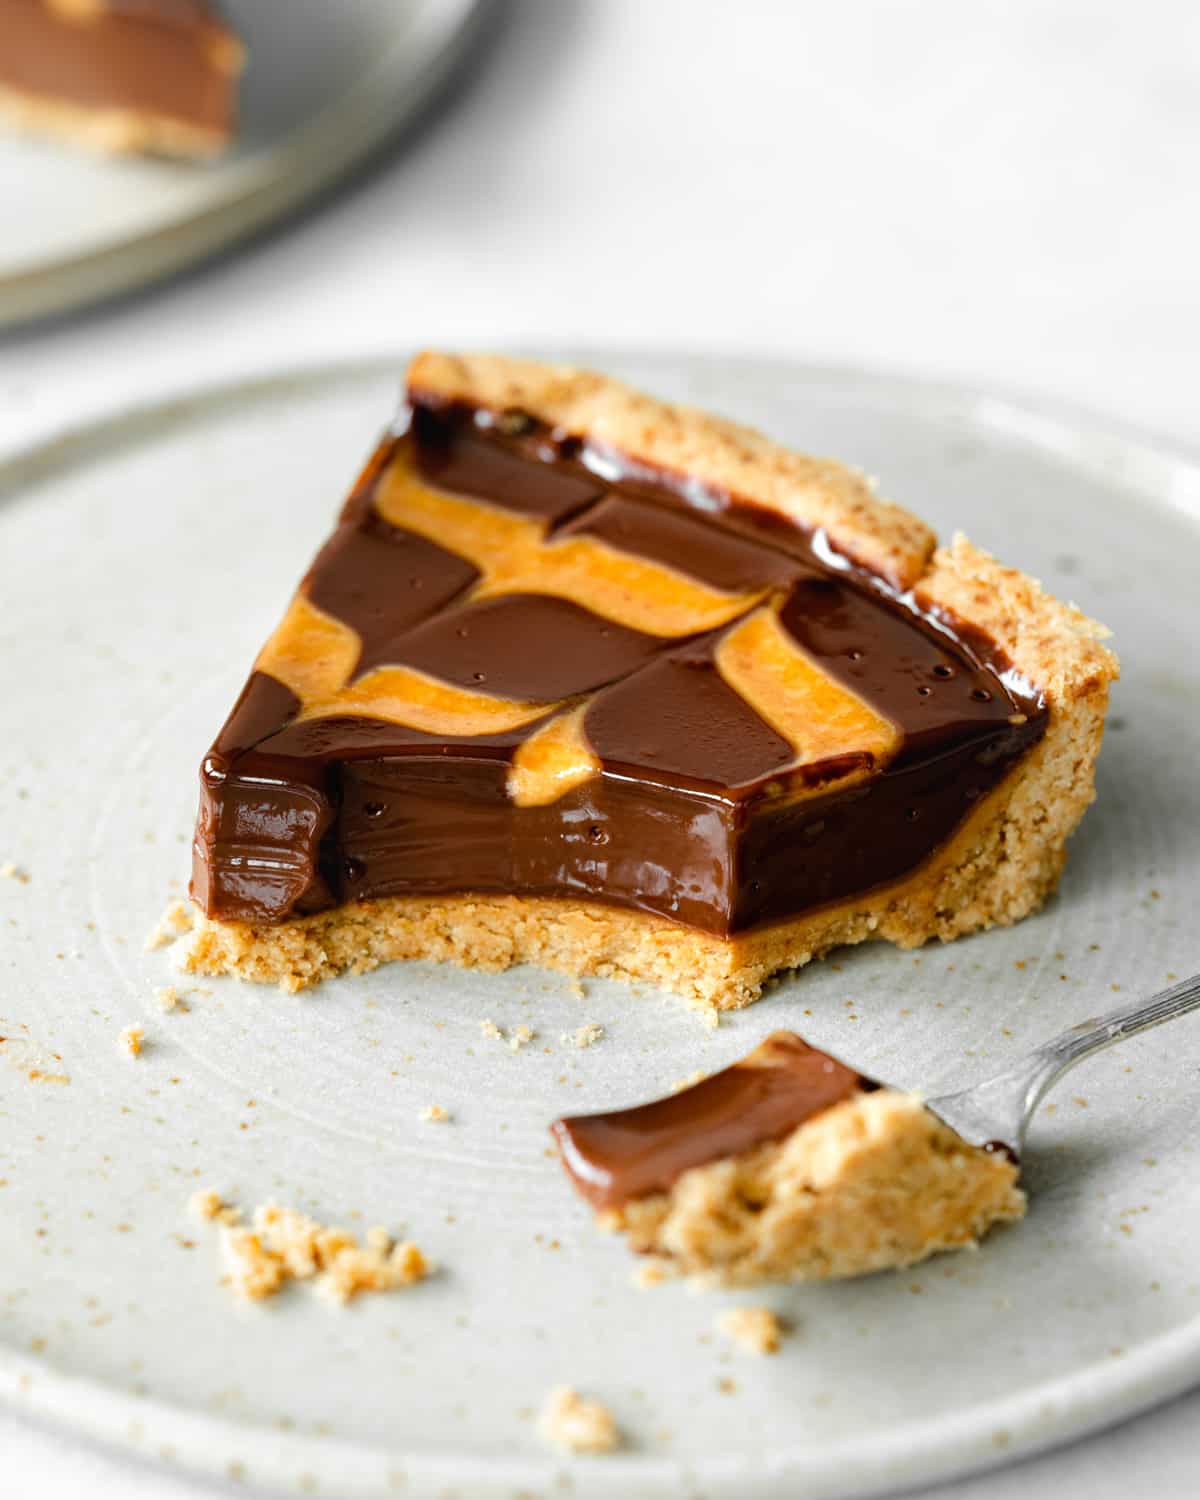 slice of peanut butter chocolate ganache tart on a plate with a fork.